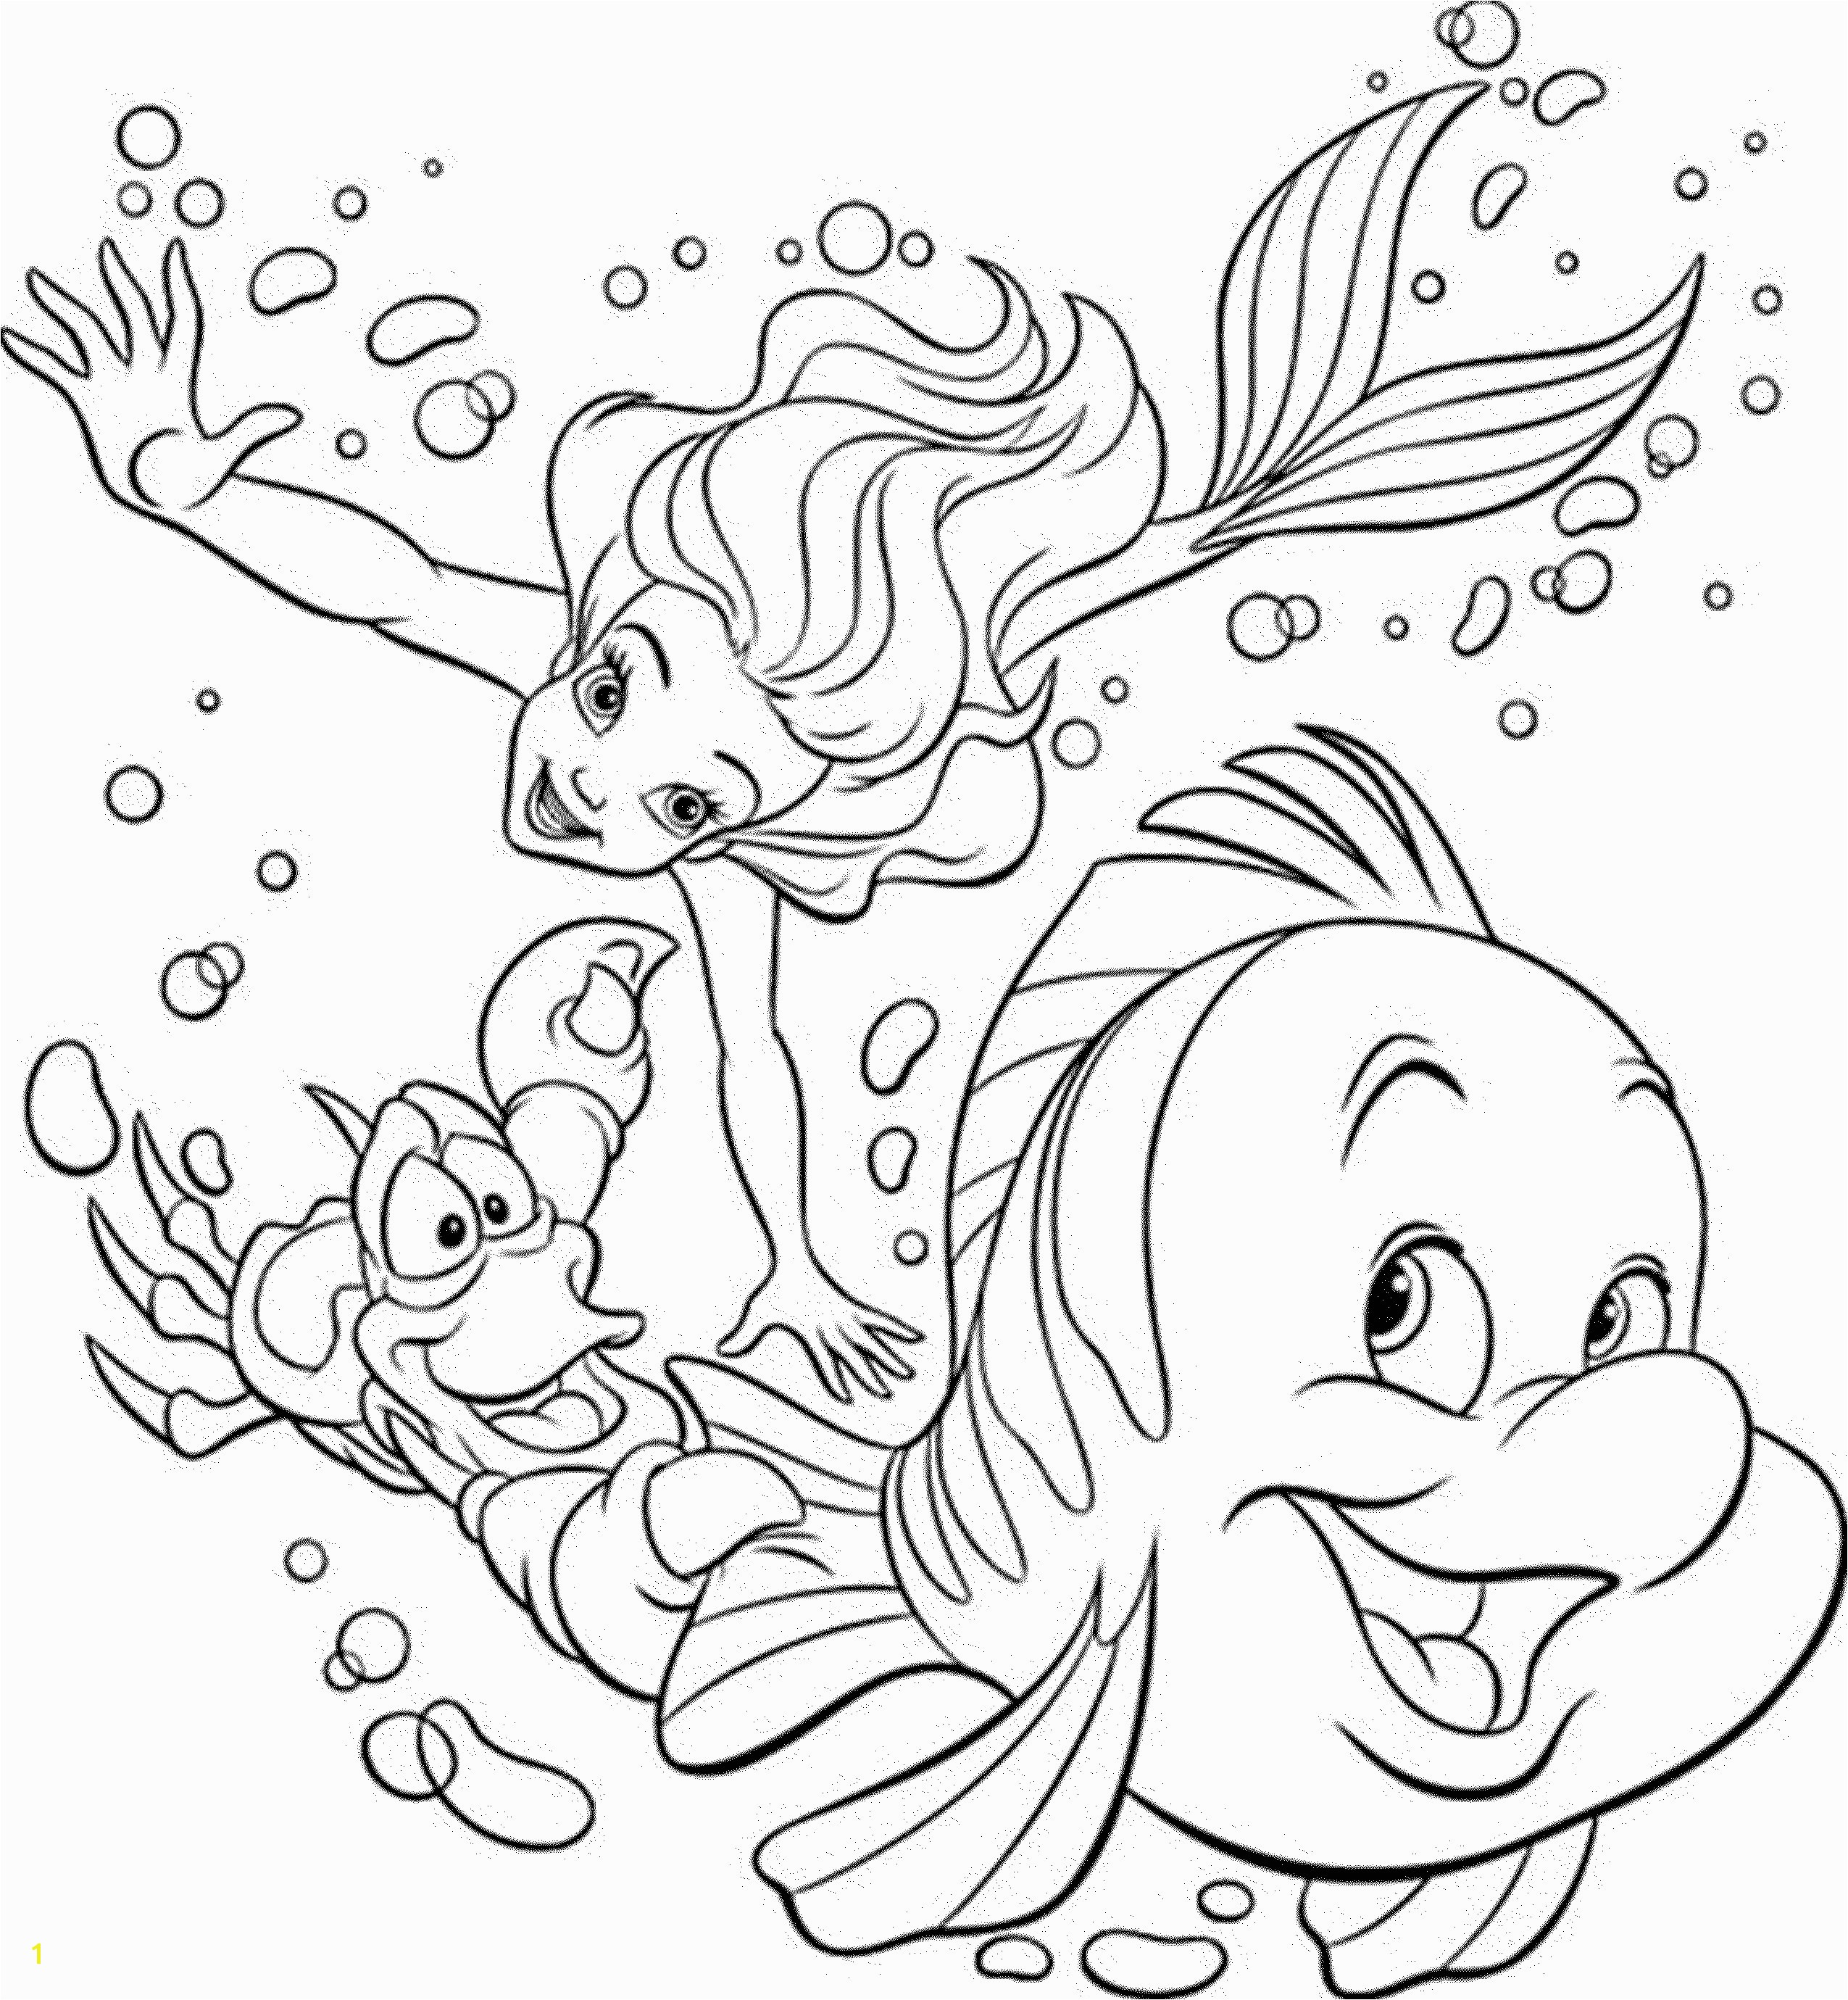 Coloring Pages for 7th Graders Adding and Subtracting Coloring Pages Luxury Announcing Coloring